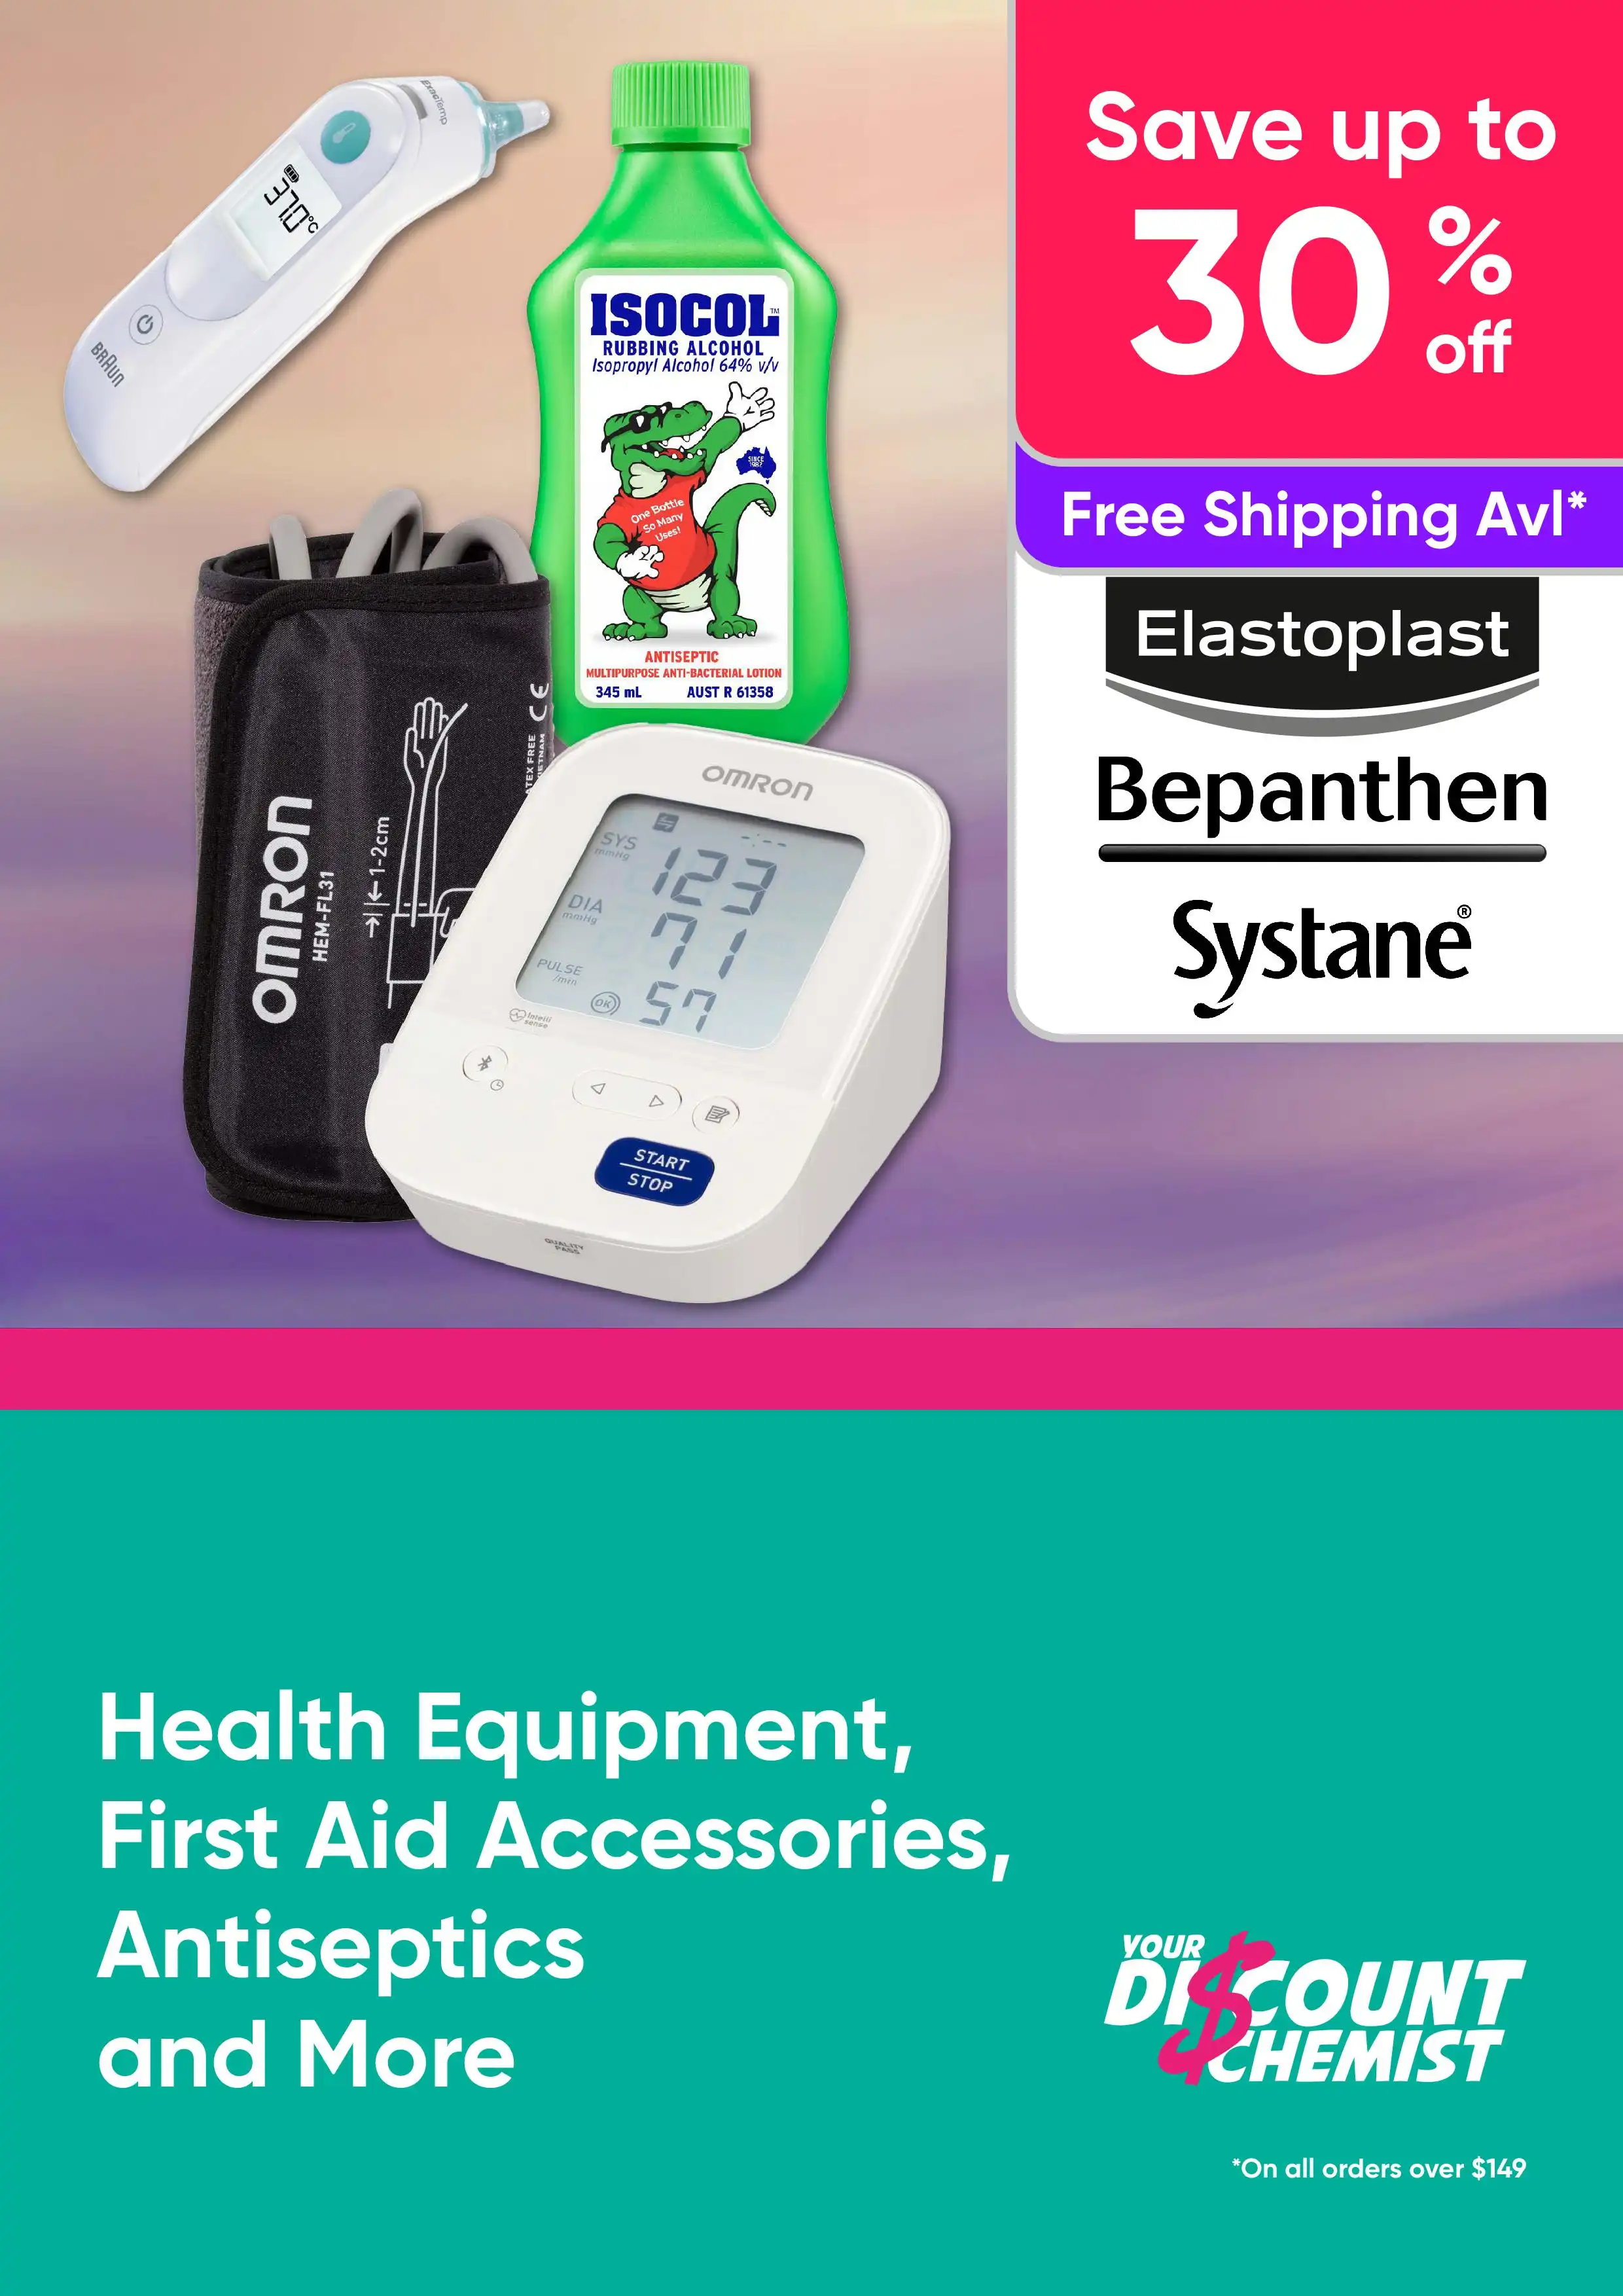 Medical Specials On Sale - Save On a Range of Products Including Health Equipment and More